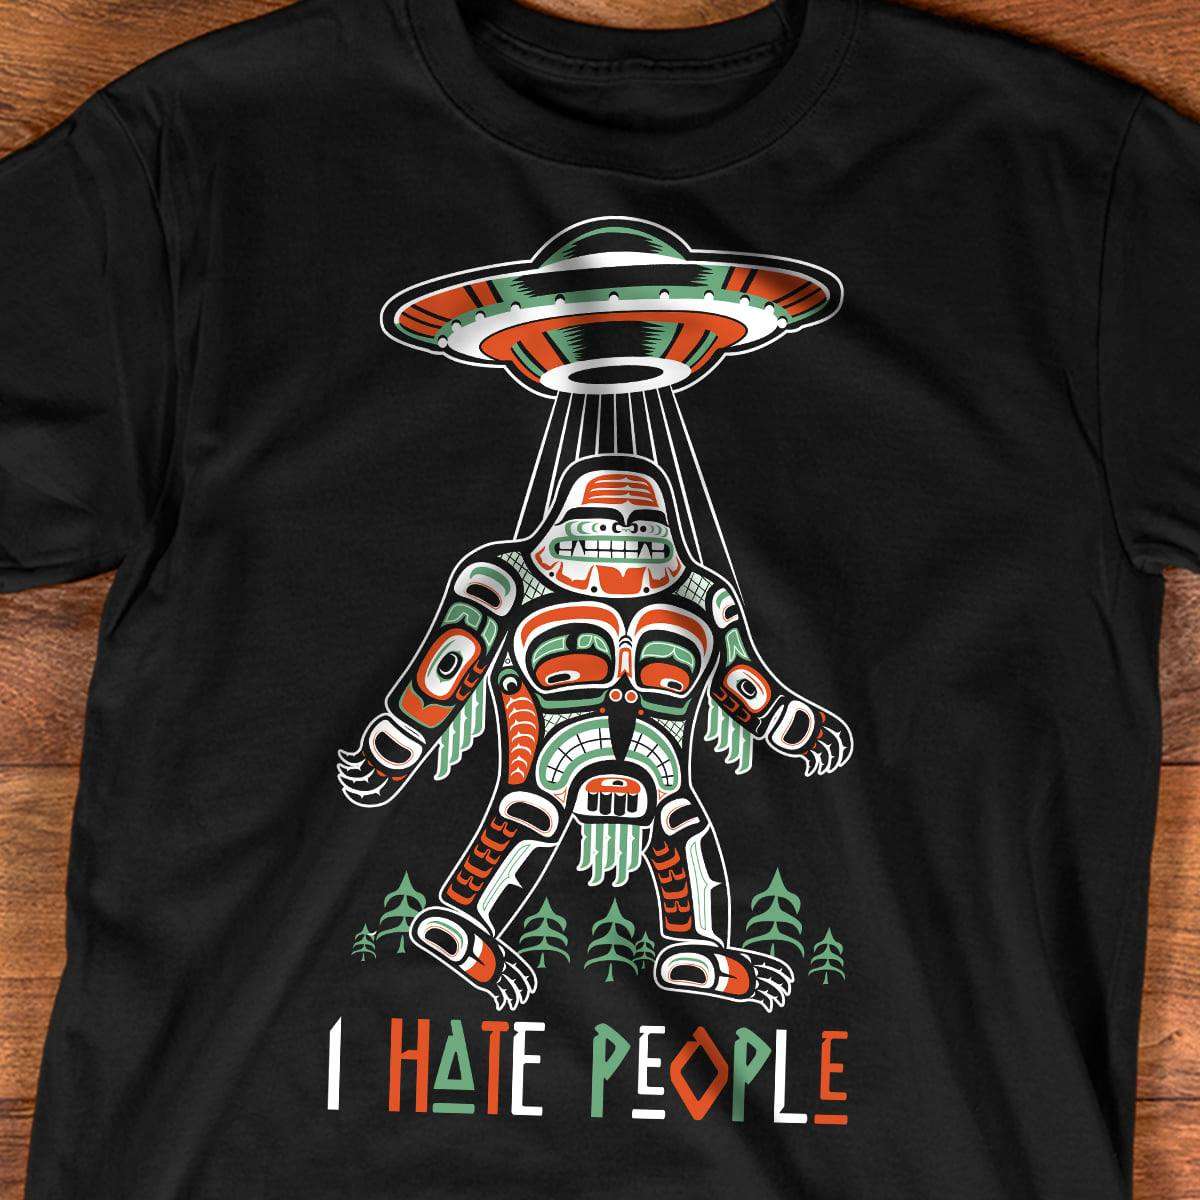 I hate people - Bigfoot and ufo, unidentified object found